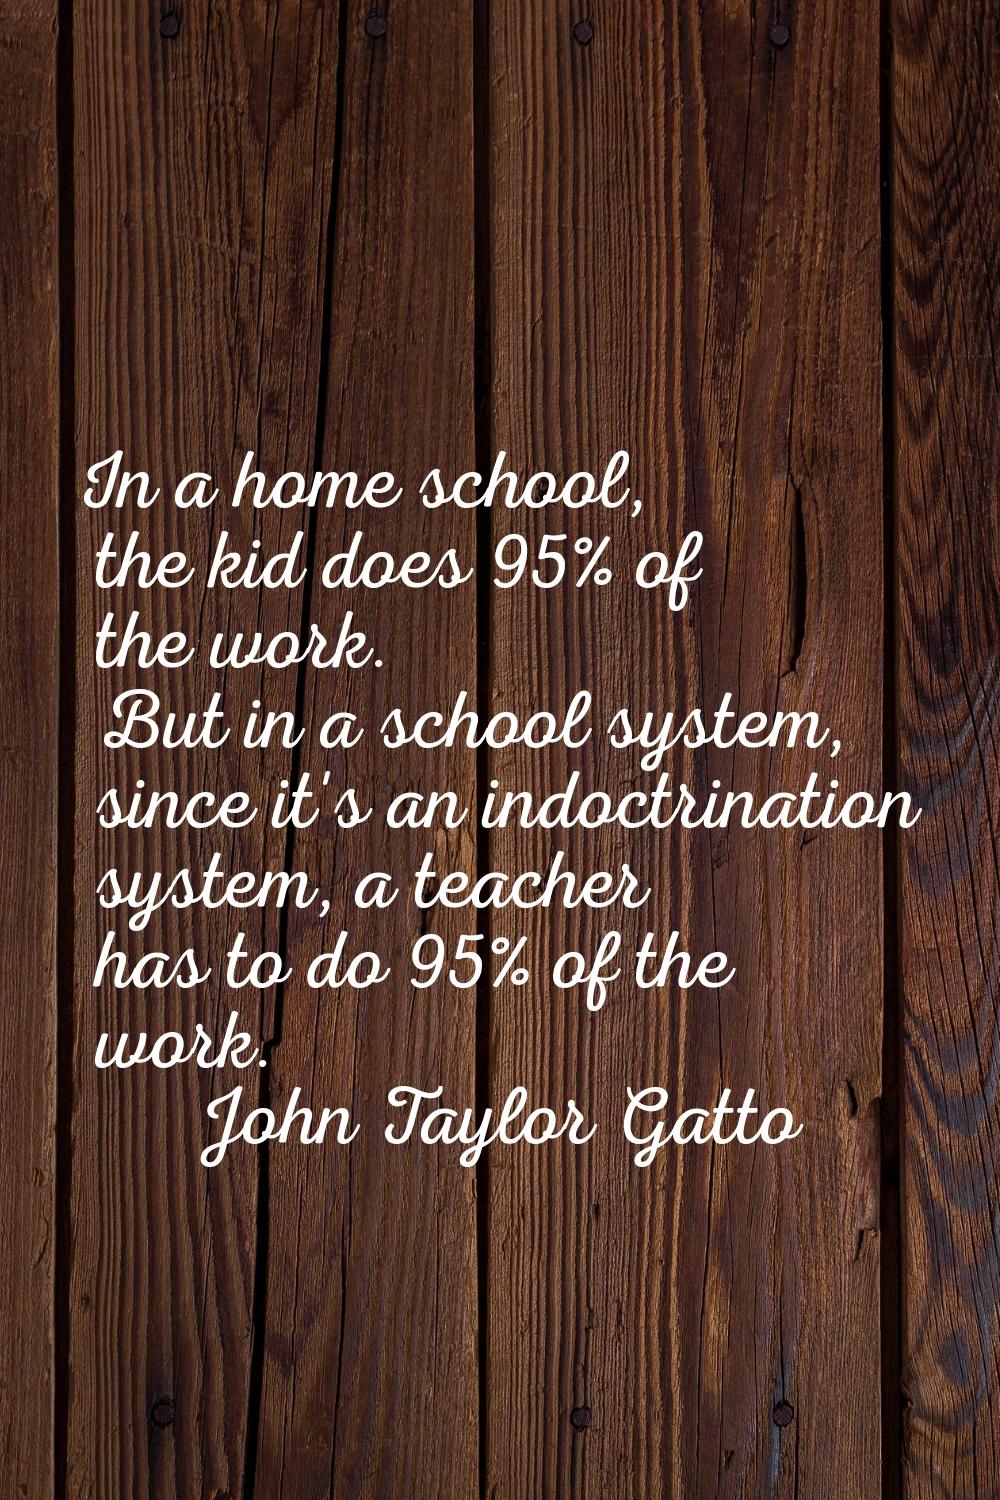 In a home school, the kid does 95% of the work. But in a school system, since it's an indoctrinatio